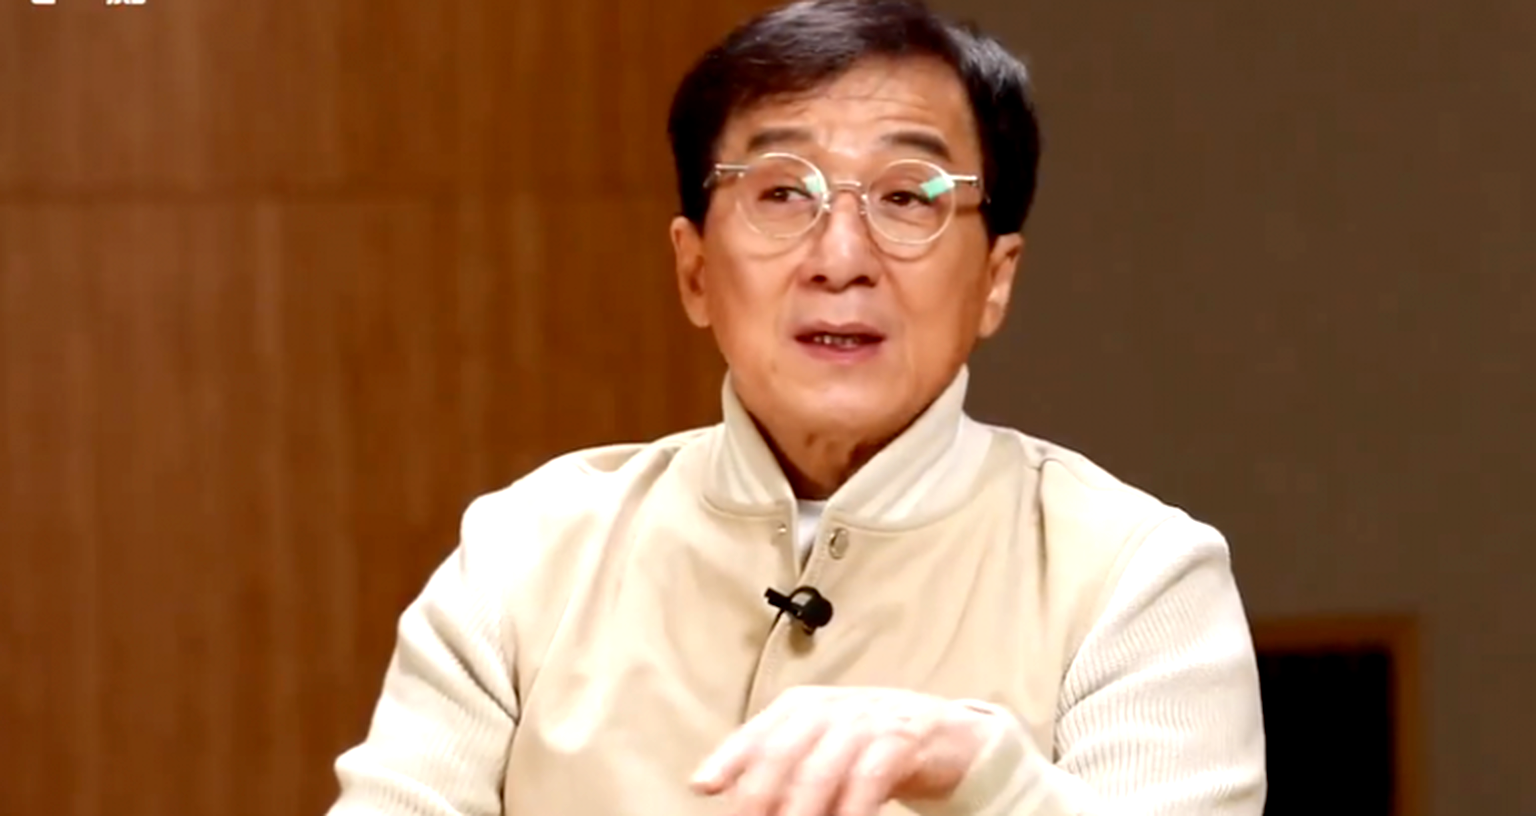 ‘They do not want to experience any hardship’: Jackie Chan says young actors lack work ethic